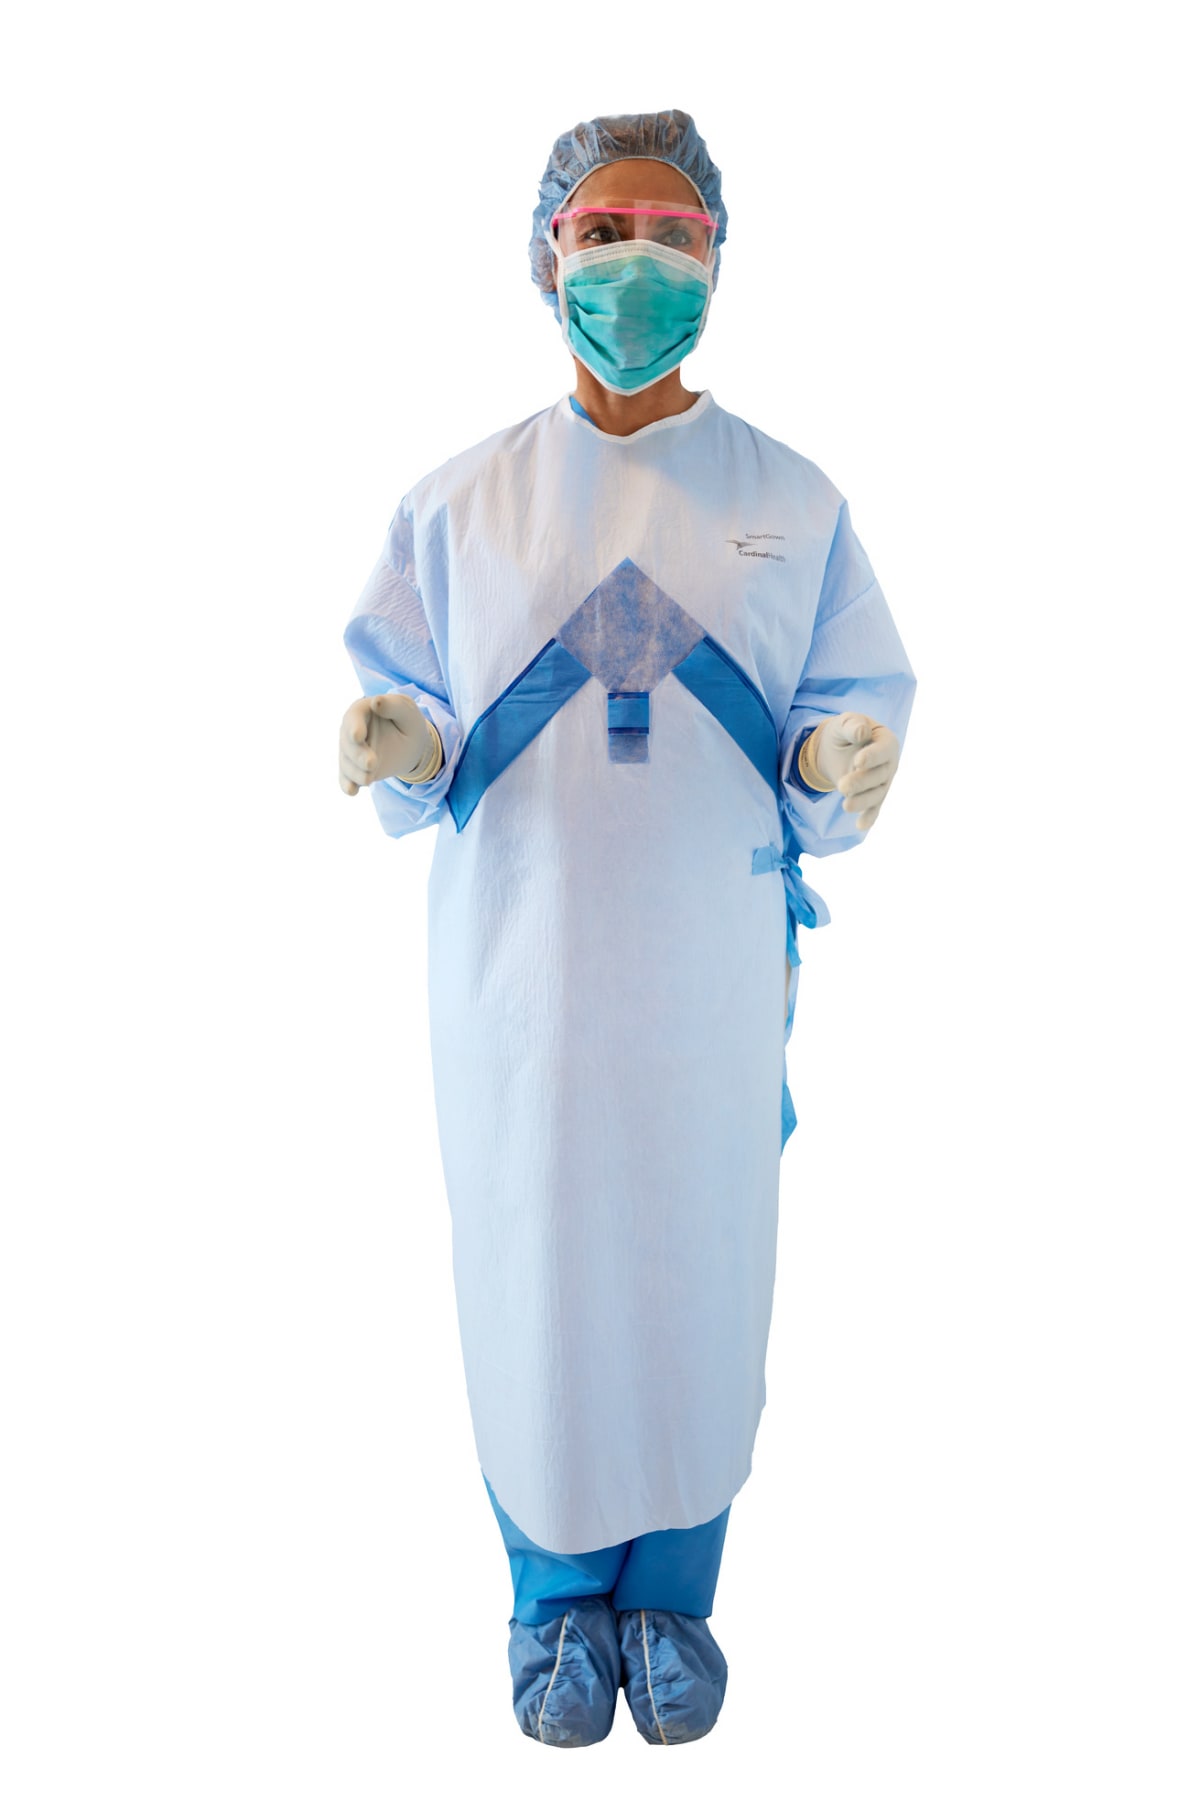 EZGOODZ Blue Disposable Isolation Gown, Large. Pack of 10 Polyethylene  Surgical Disposable Gowns with Long Sleeves, Neck and Waist Ties.  Non-Sterile Fluid Resistant Unisex Health Isolation Gowns - Amazon.com